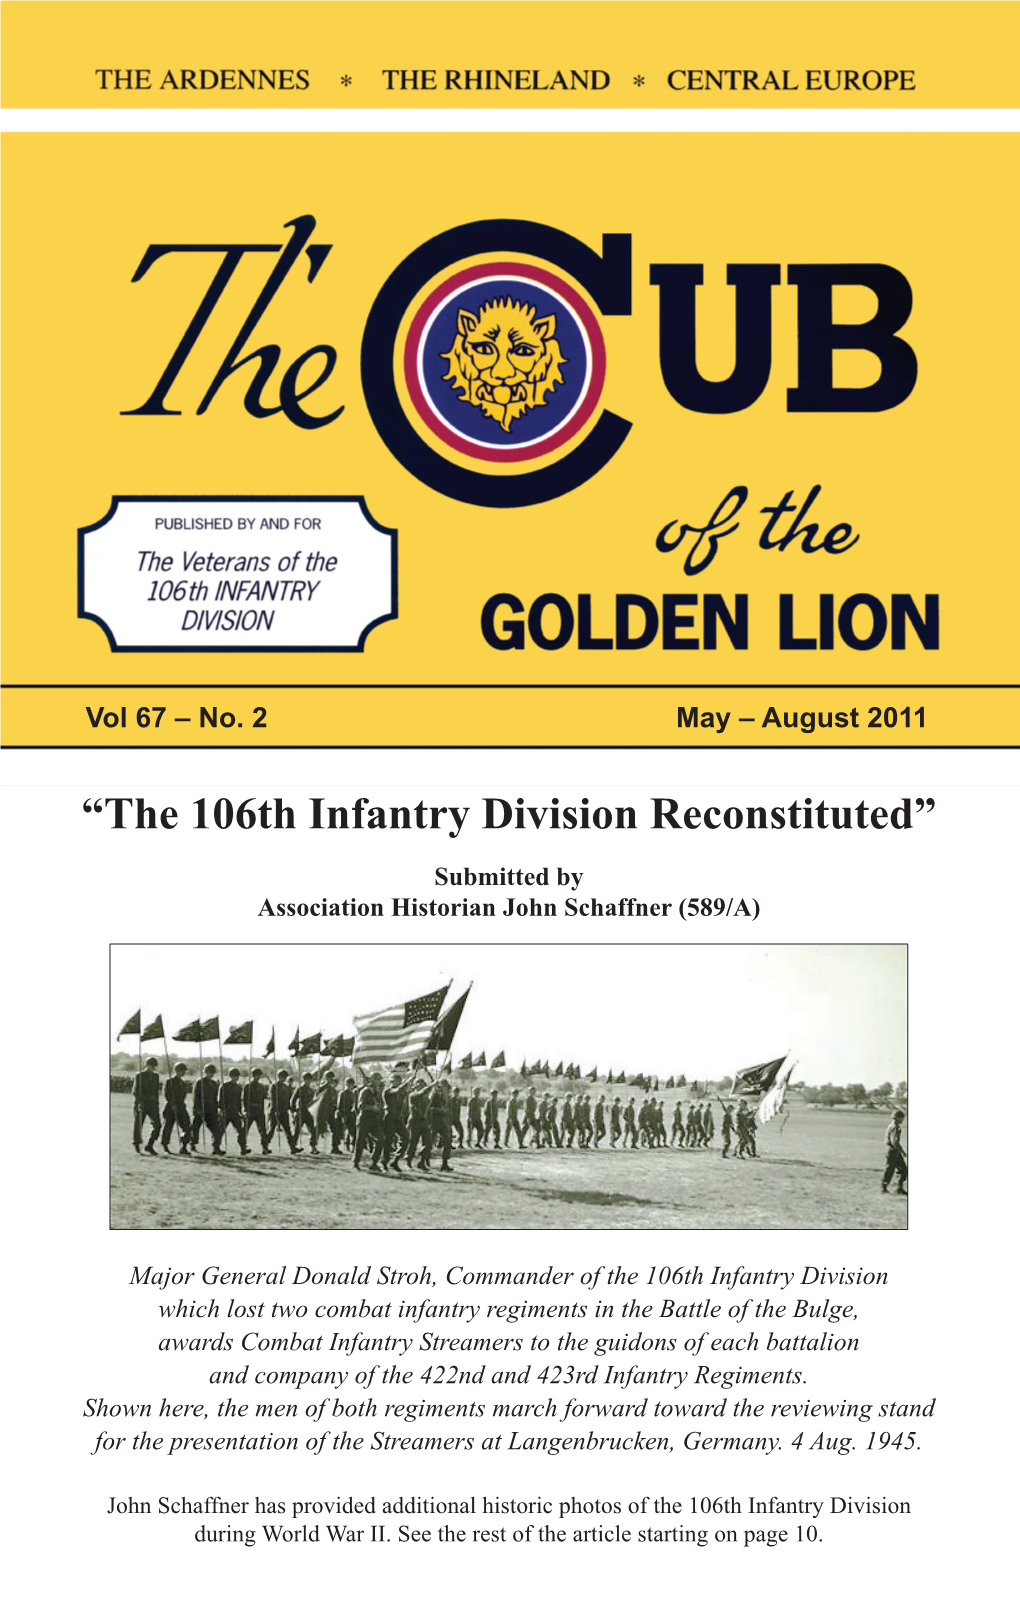 “The 106Th Infantry Division Reconstituted” Submitted by Association Historian John Schaffner (589/A)